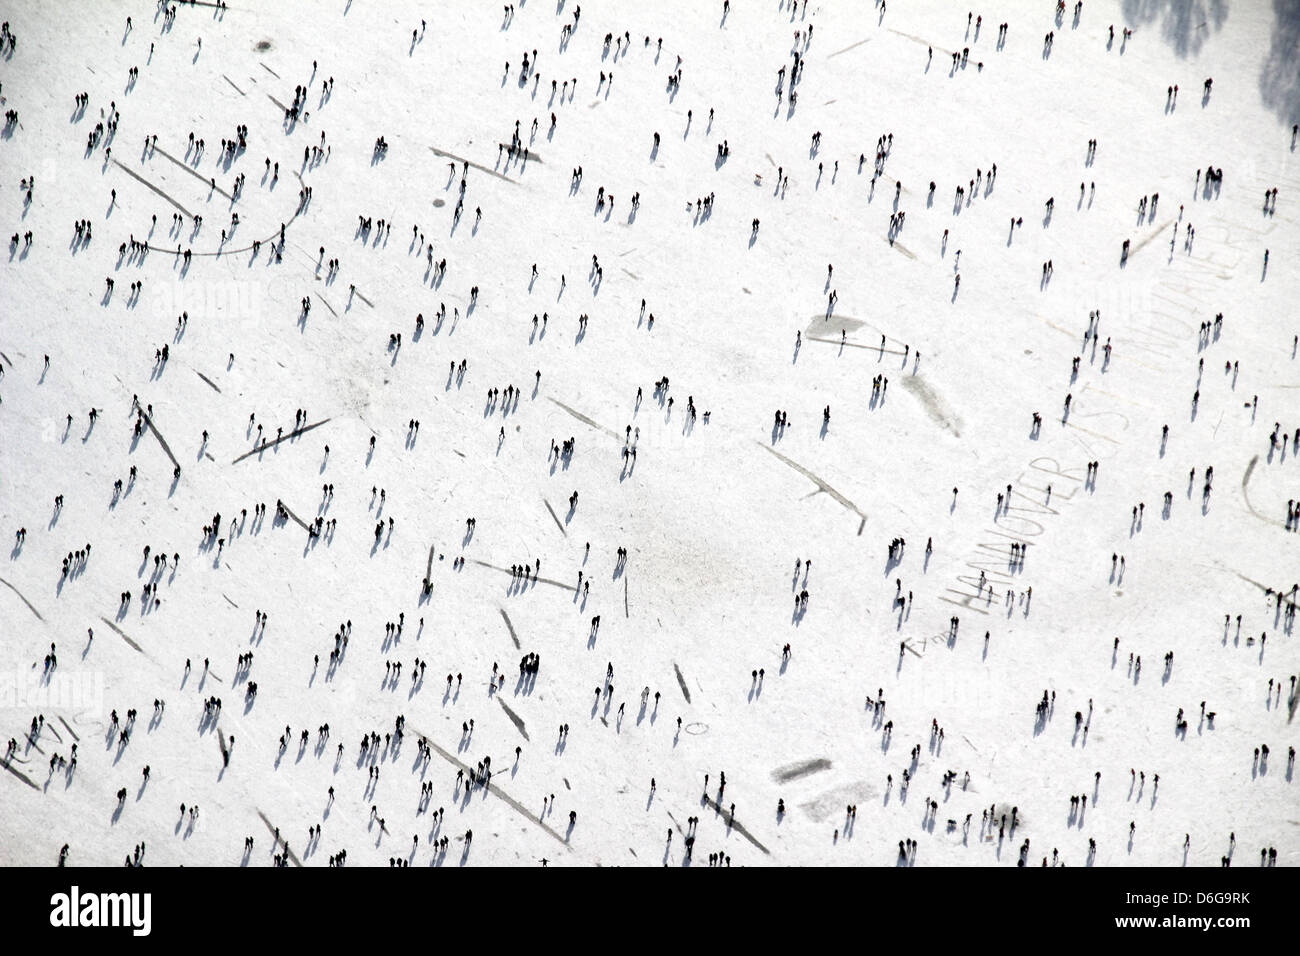 Thousands of people gather at the frozen Masch Lake in Hanover, Germany, 11 February 2012. A 13cm thick layer of ice carries all these people easily. Photo: Stefan Rampfel Stock Photo